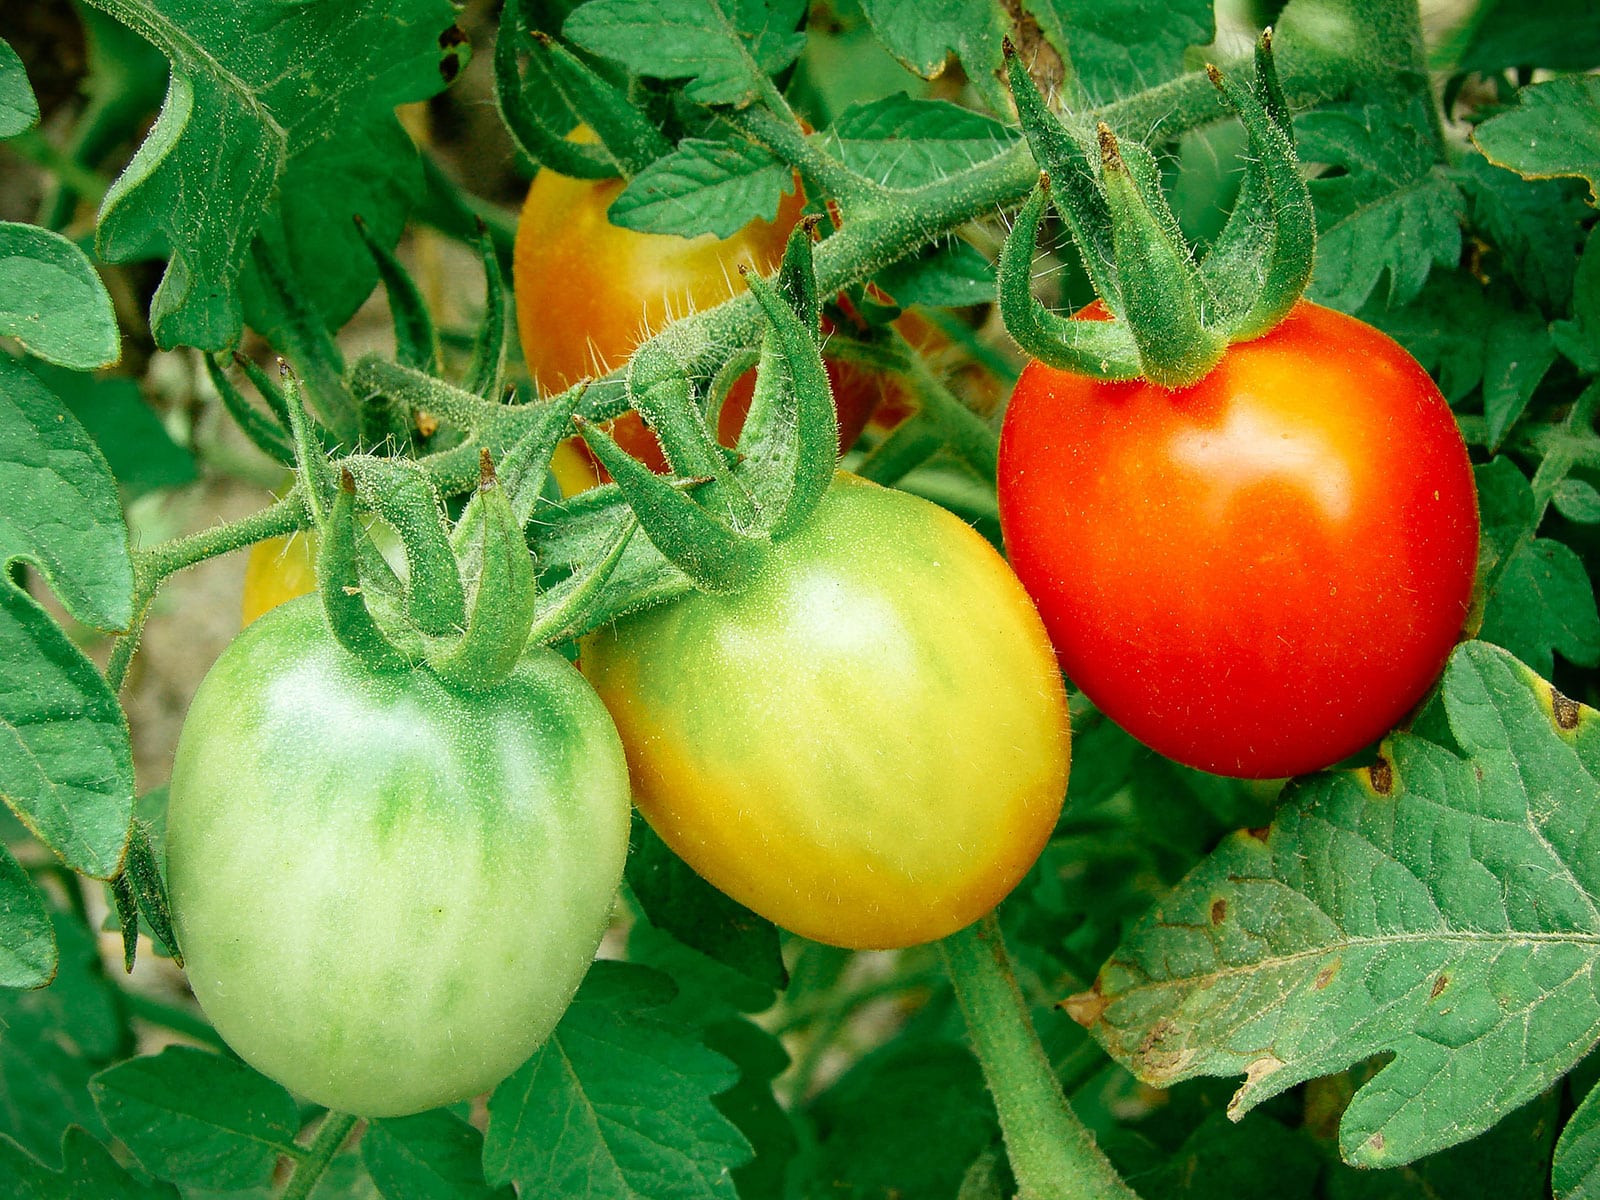 Three tomatoes on the vine in three different stages of ripeness, from green (left) to blushing (middle) to ripe (right)